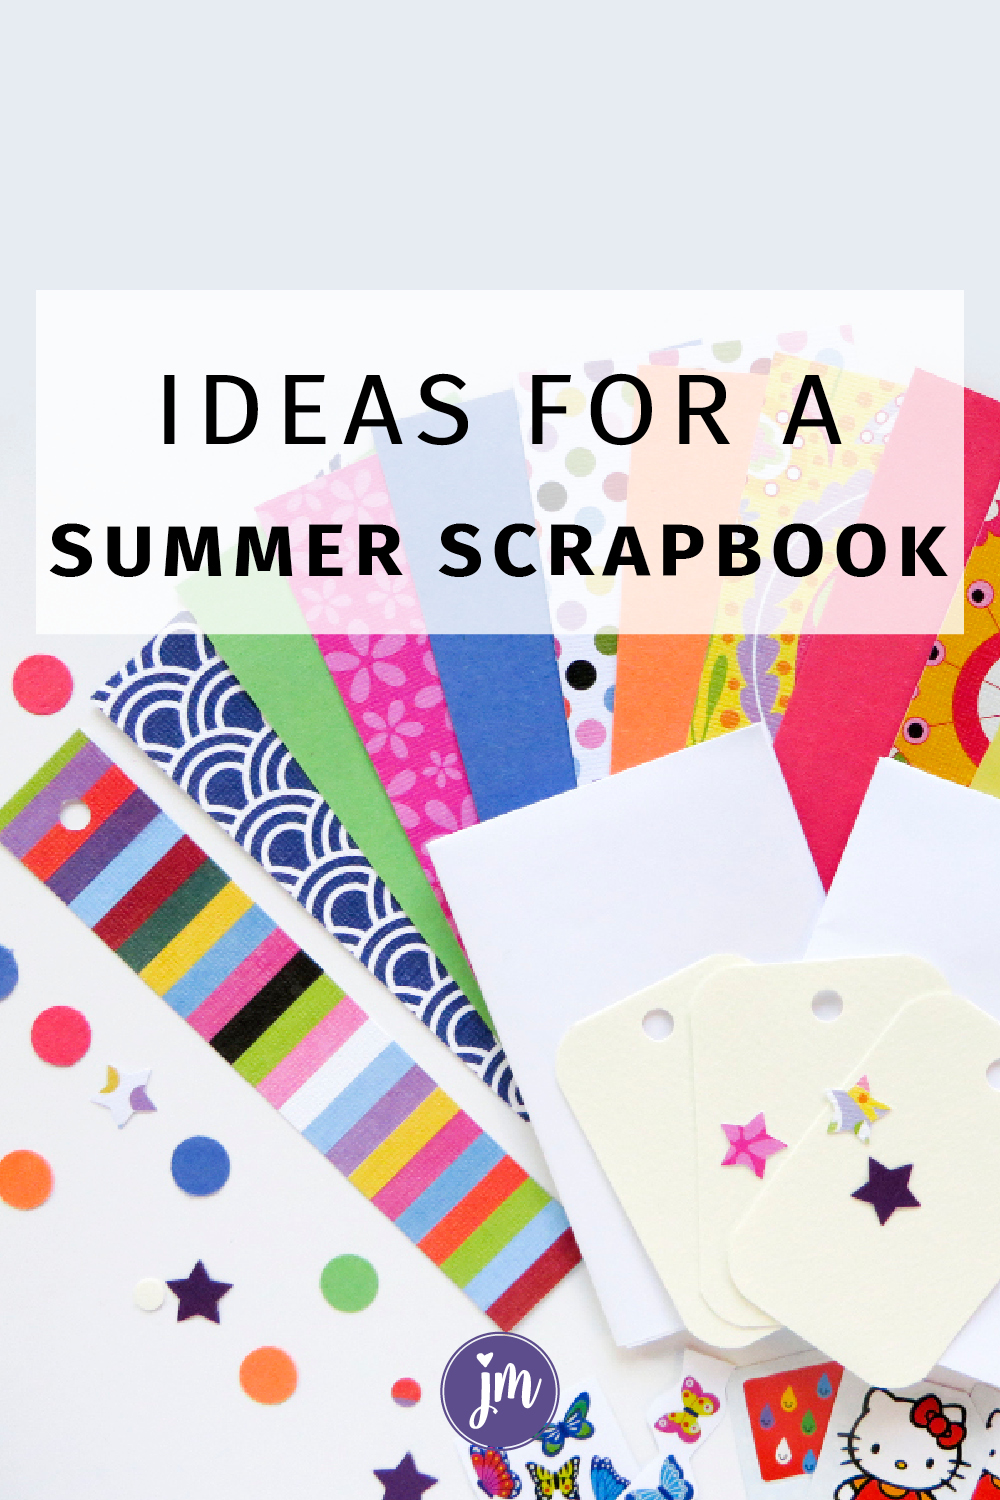 Make a summer scrapbook with these fun ideas! This is a great and simple project for kids to put together. I used to make these every summer with my mom!